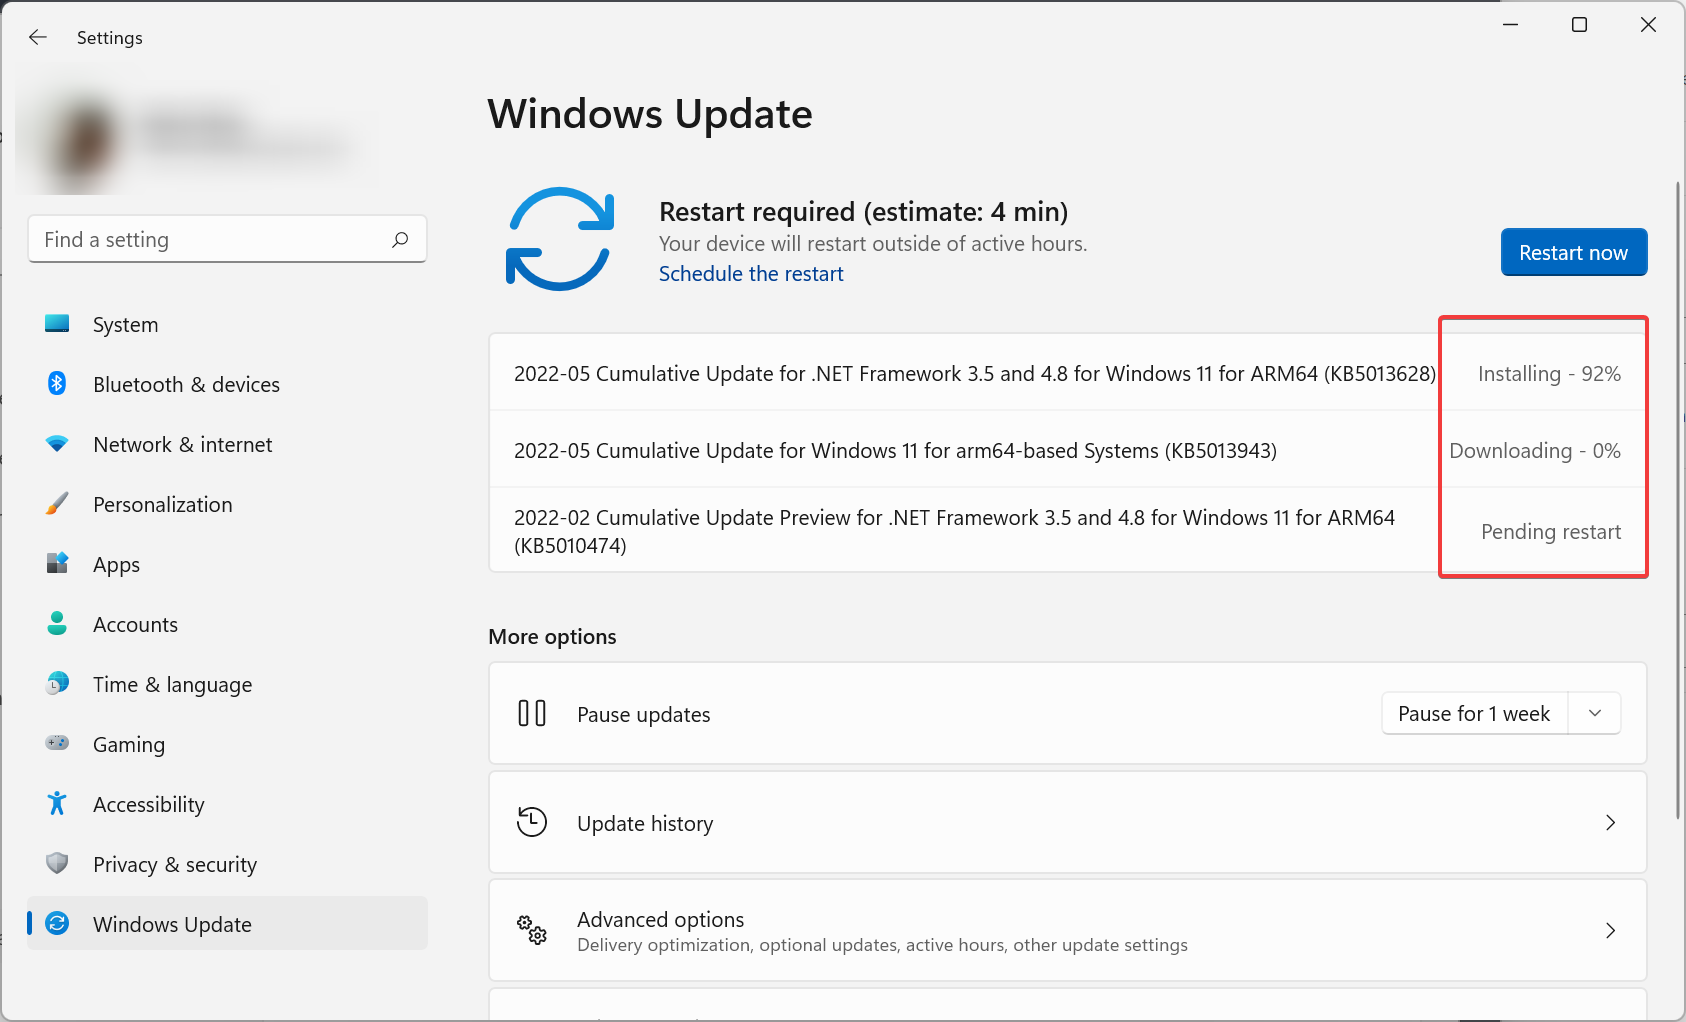 Downloading and installing the new updates from Microsoft